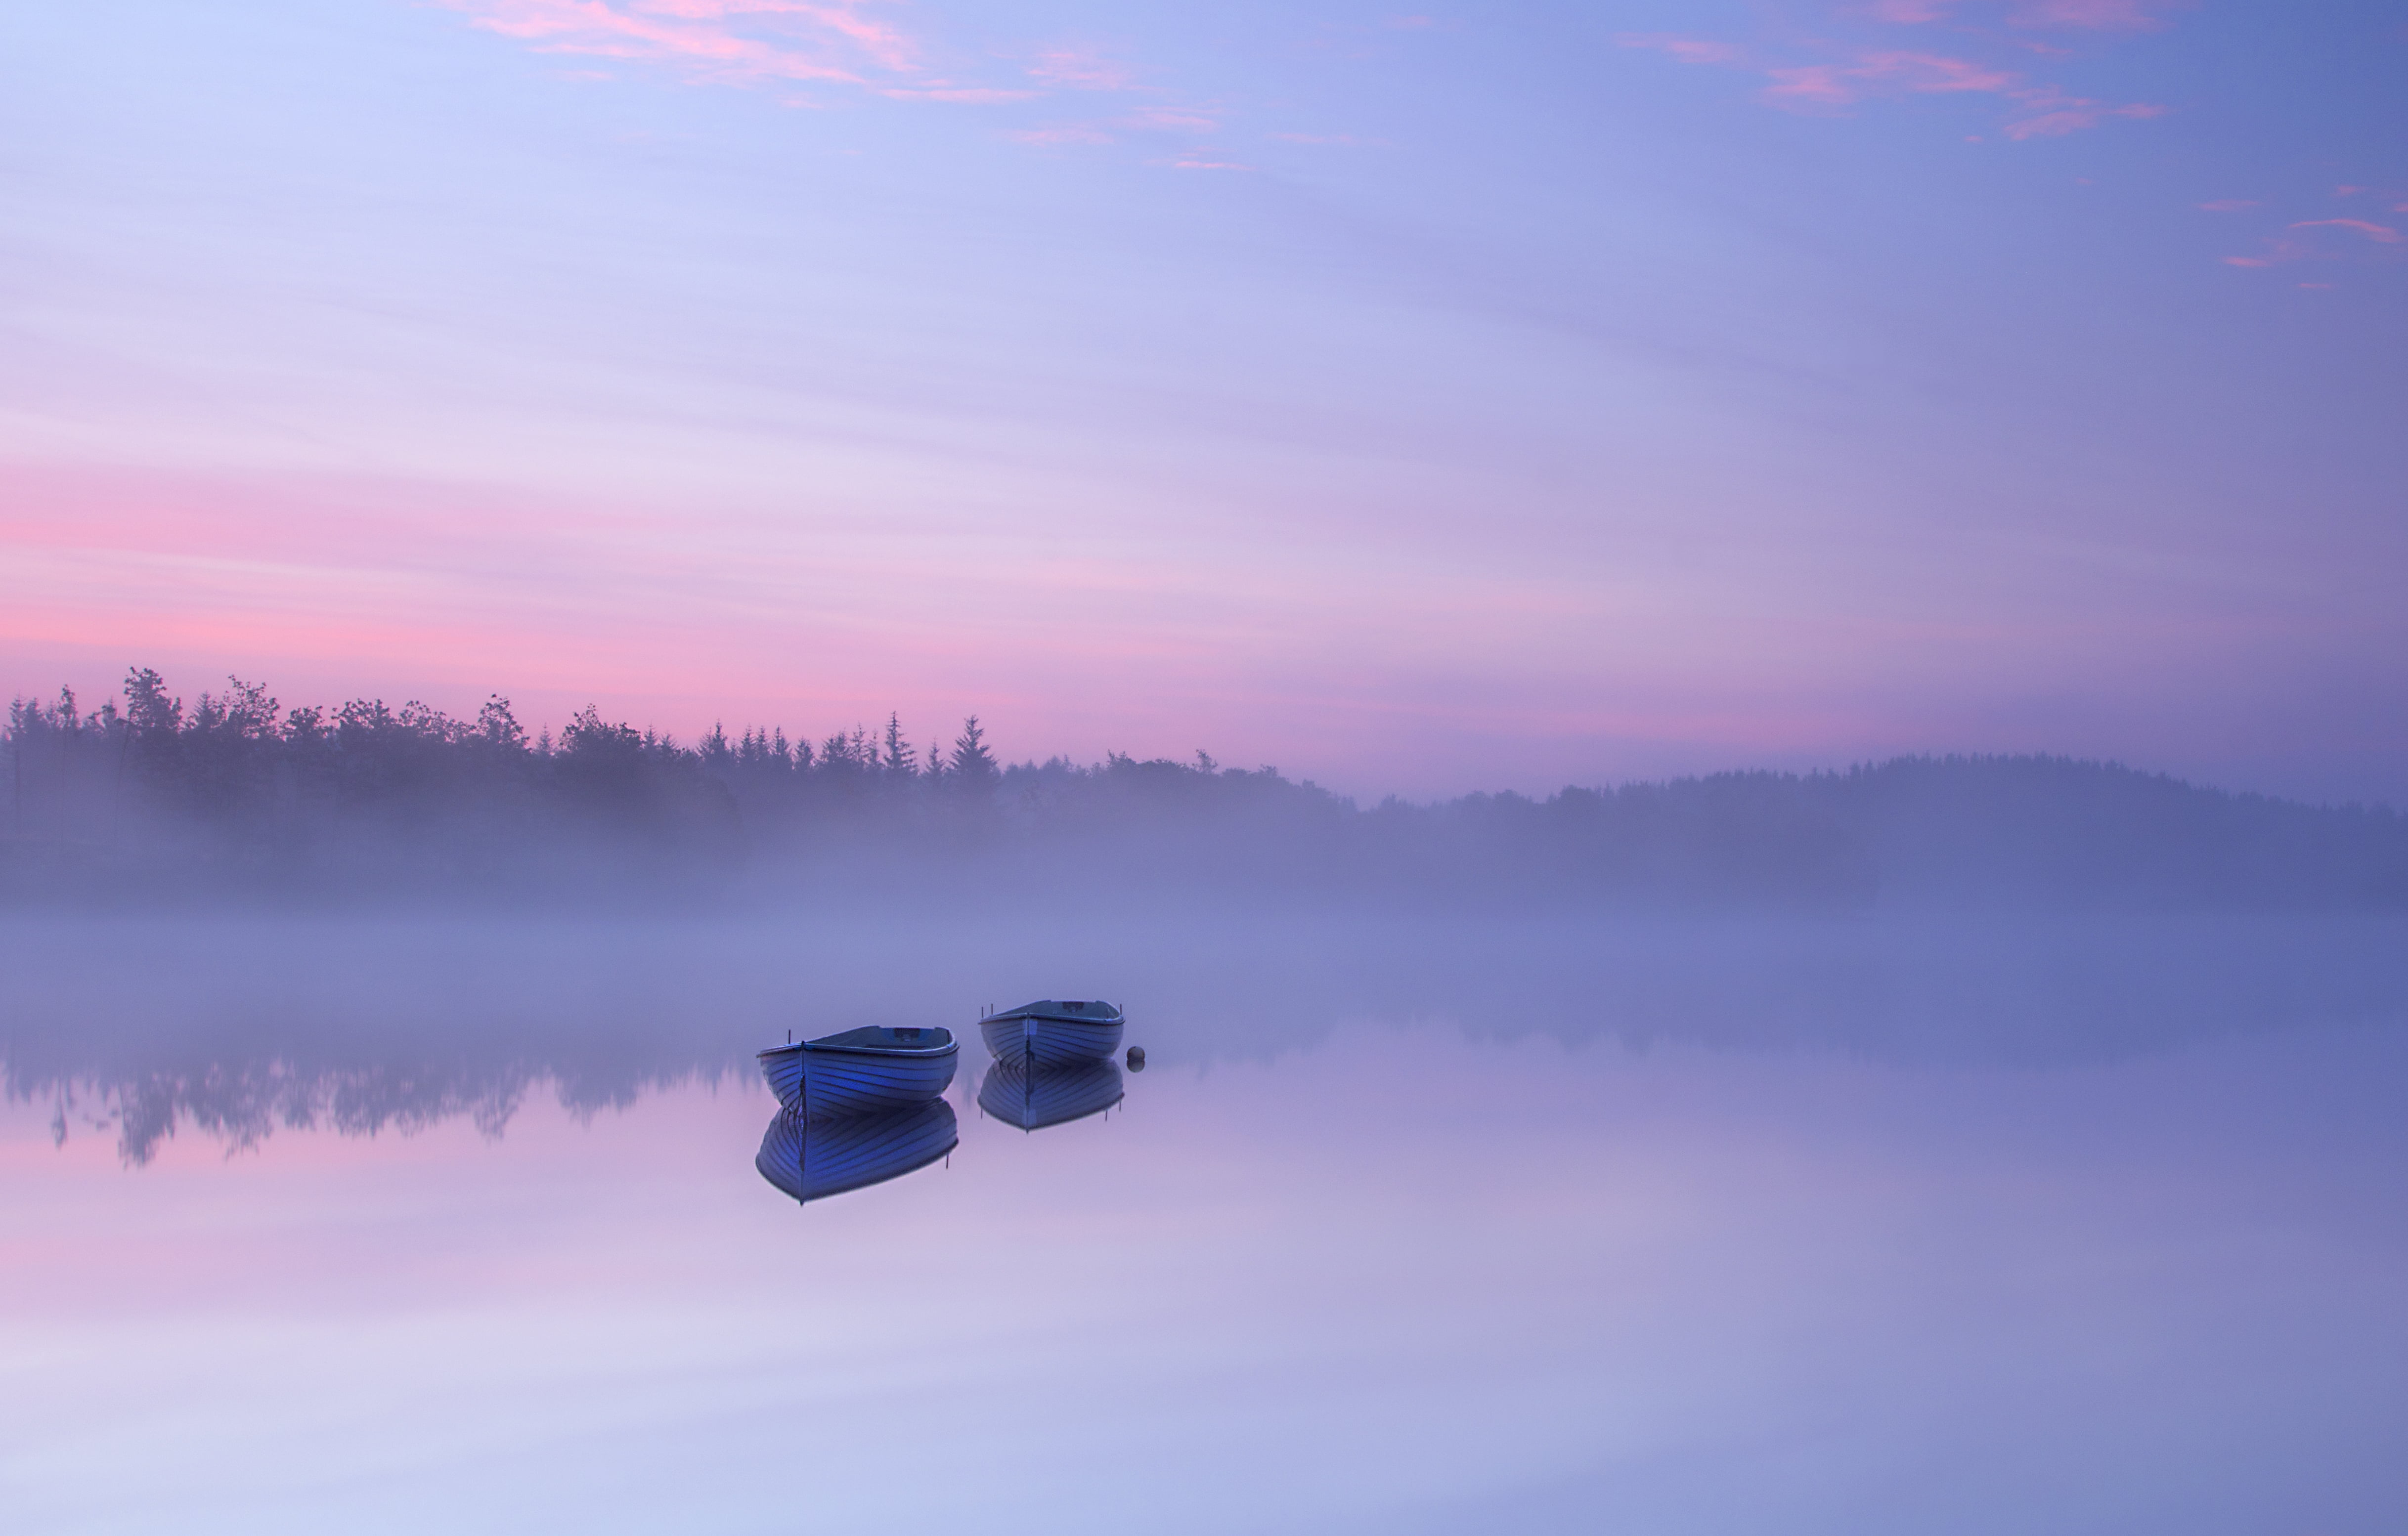 landscape photo of two jon boat on body of water surrounded by fogs under purple and pink sky